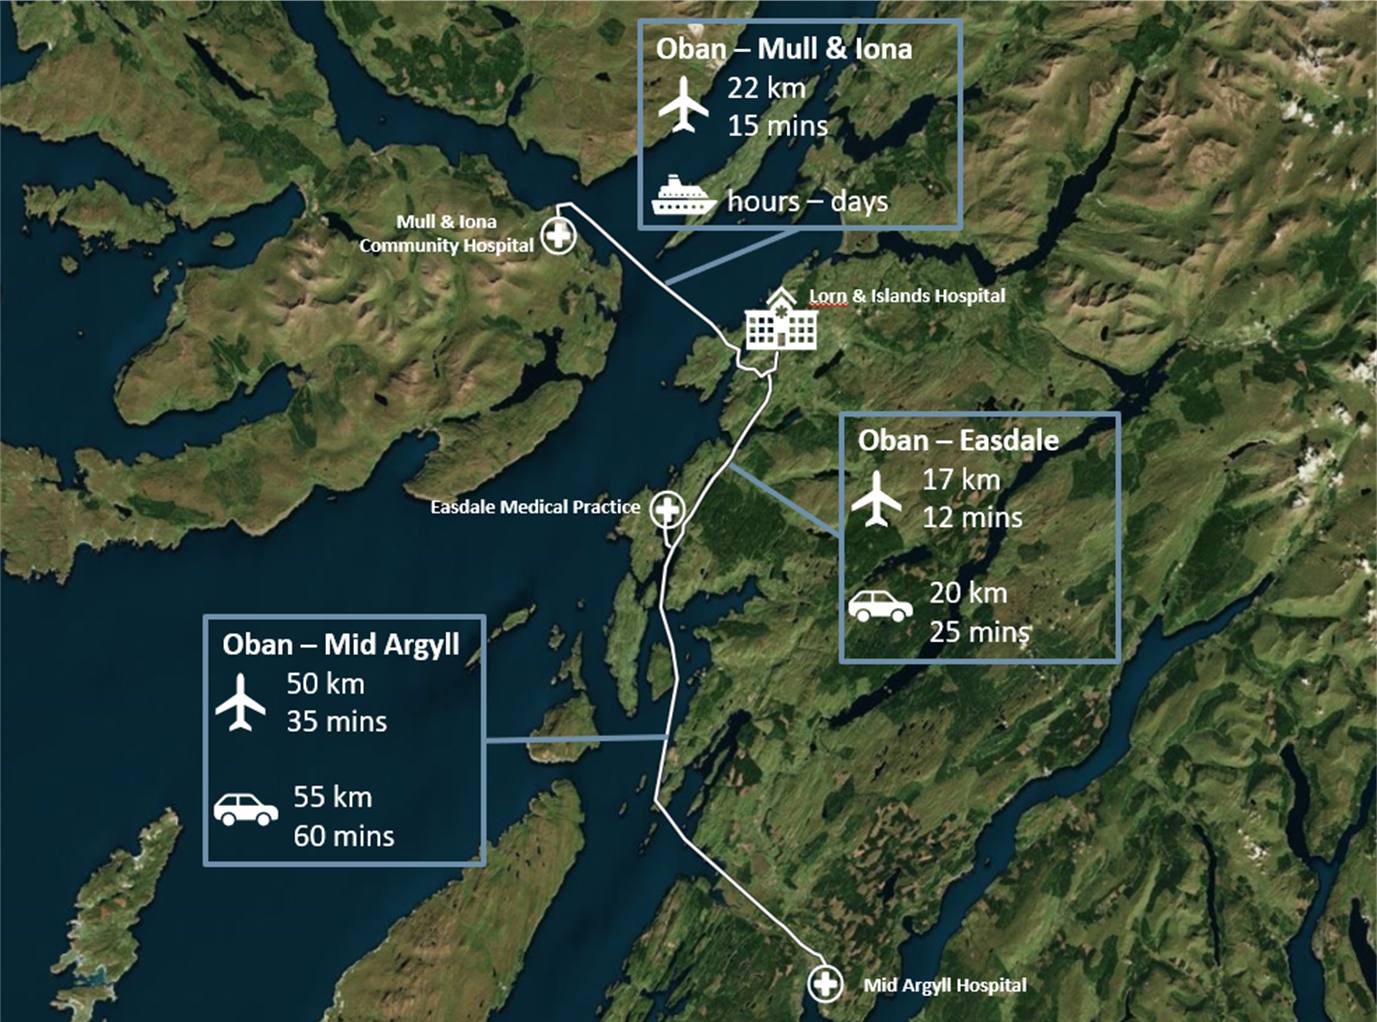 The Skyports trial linked three hospitals and a medical practice in the Argyll and Bute area of Scotland. Due to the area’s geography, which includes several islands, overland delivery can take up to 21 hours, whereas drones can deliver in 1 hour.